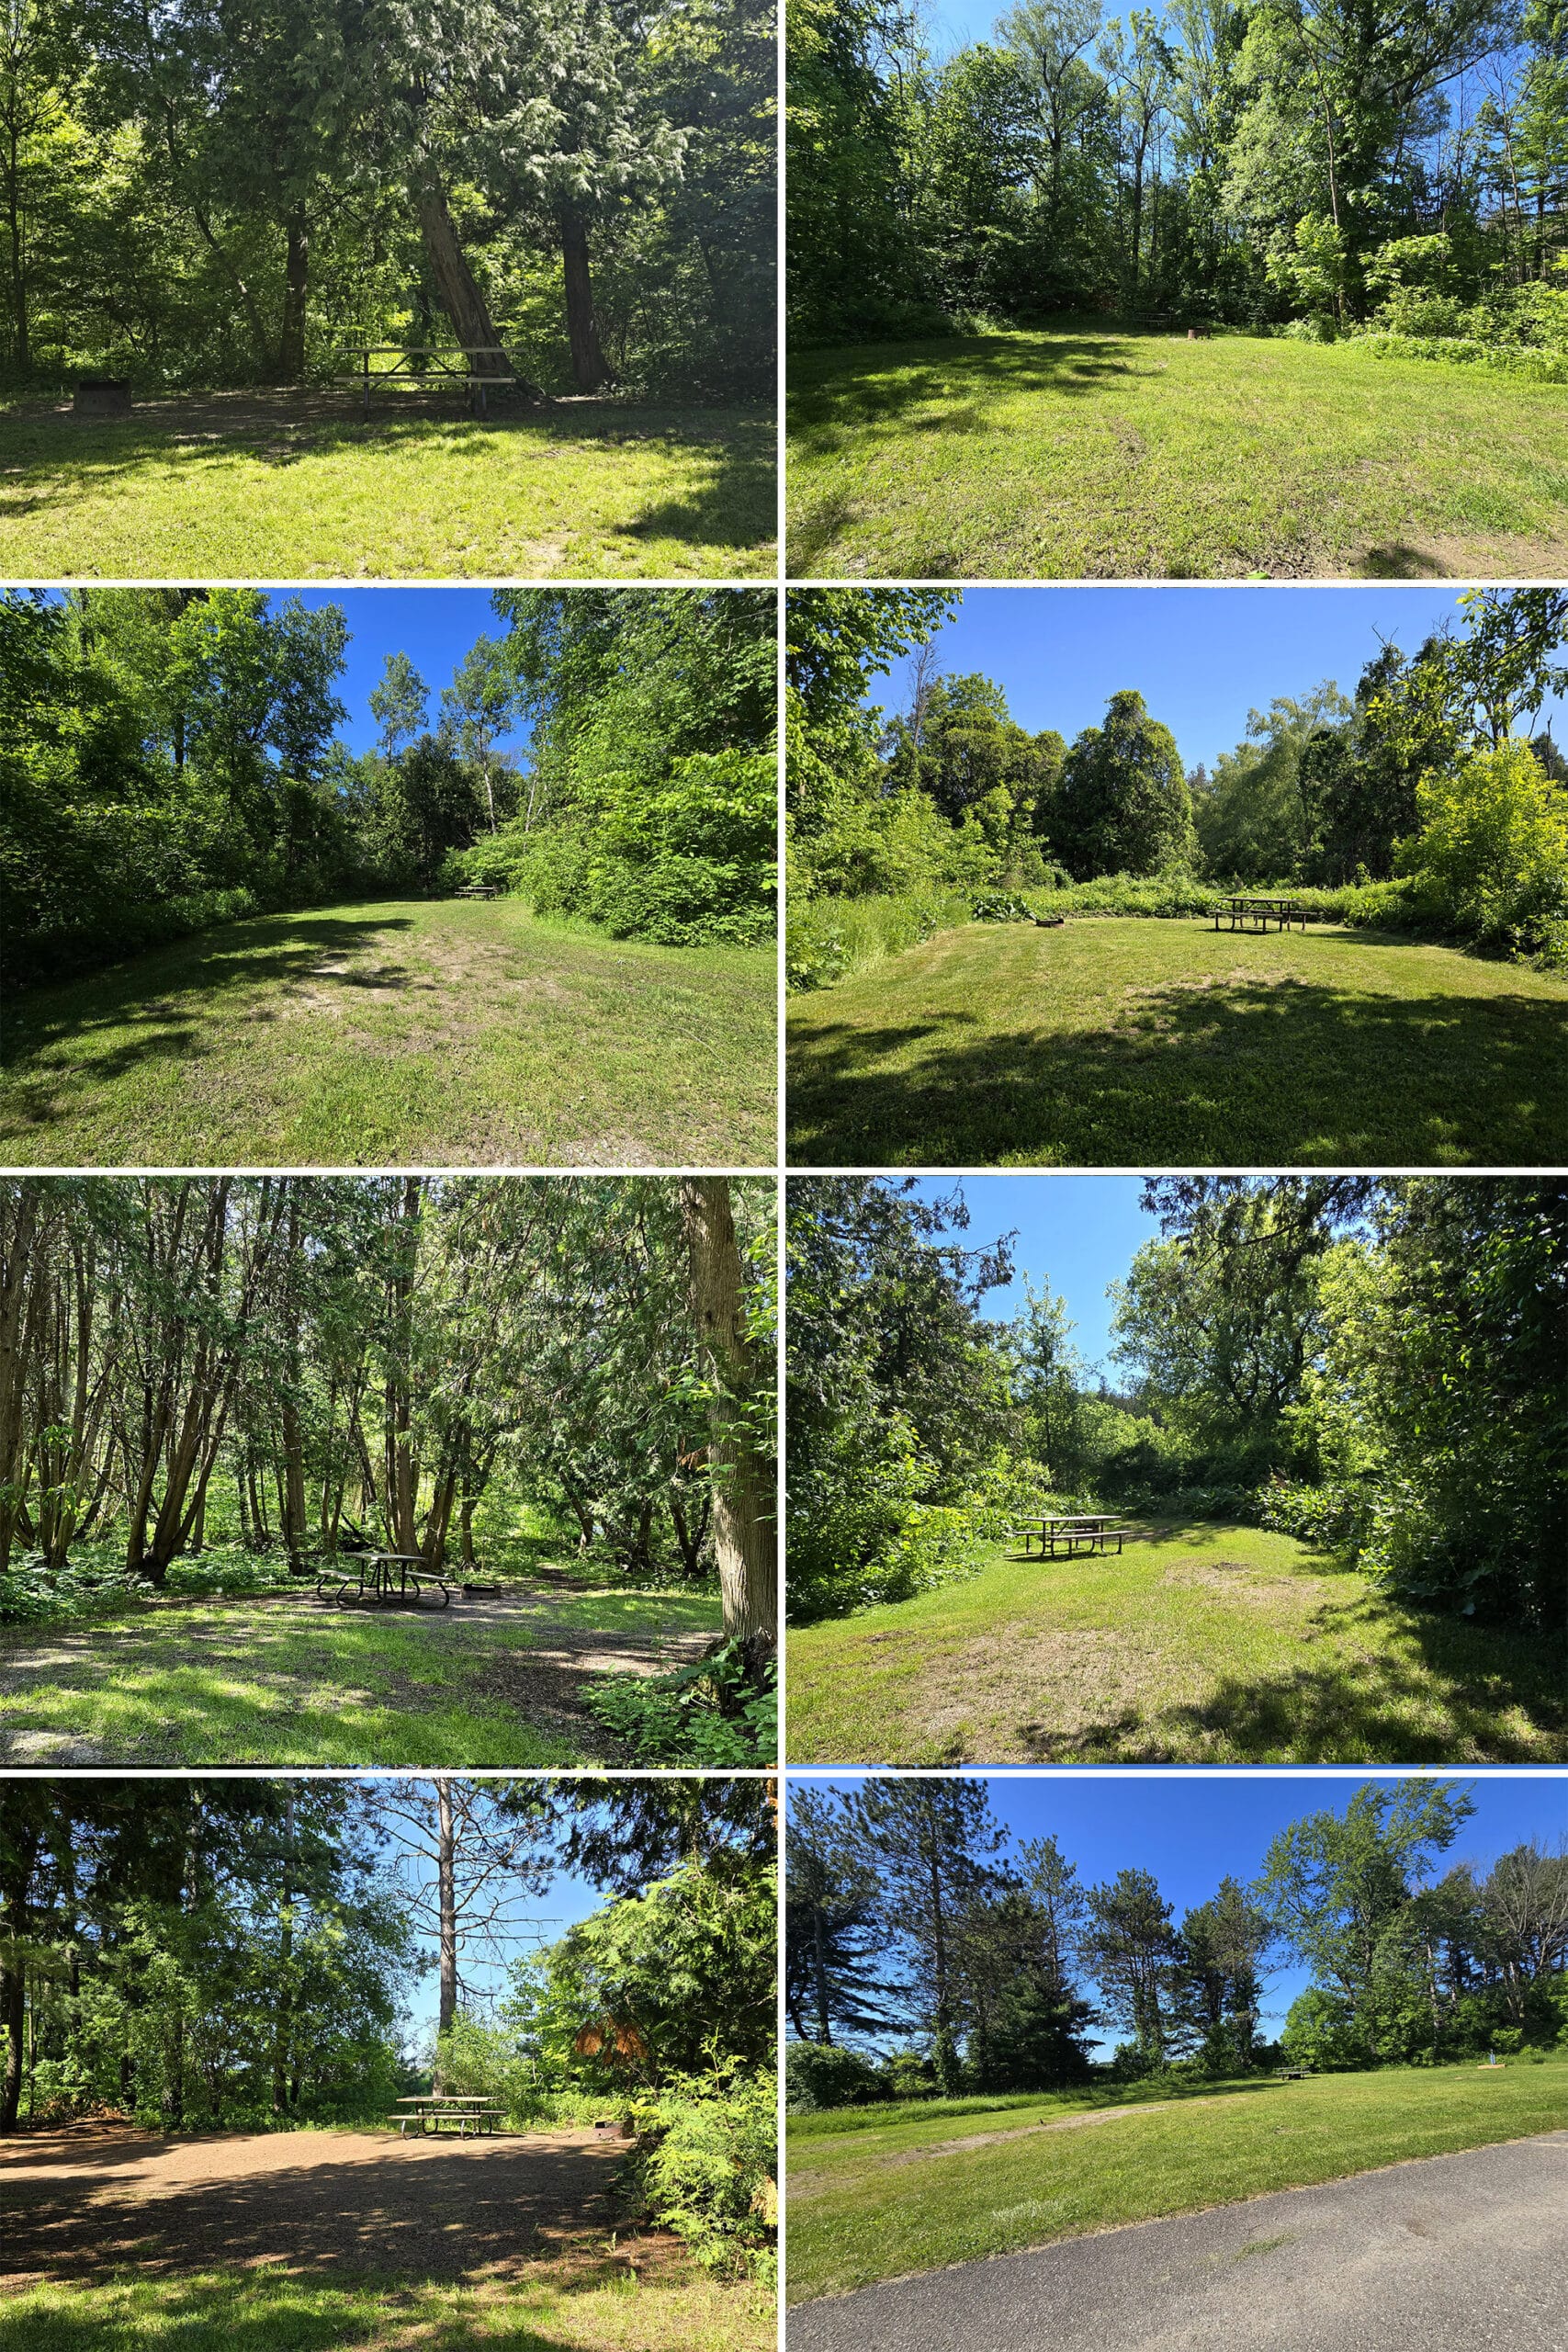 8 part image showing various campsites from the Riverside campground.